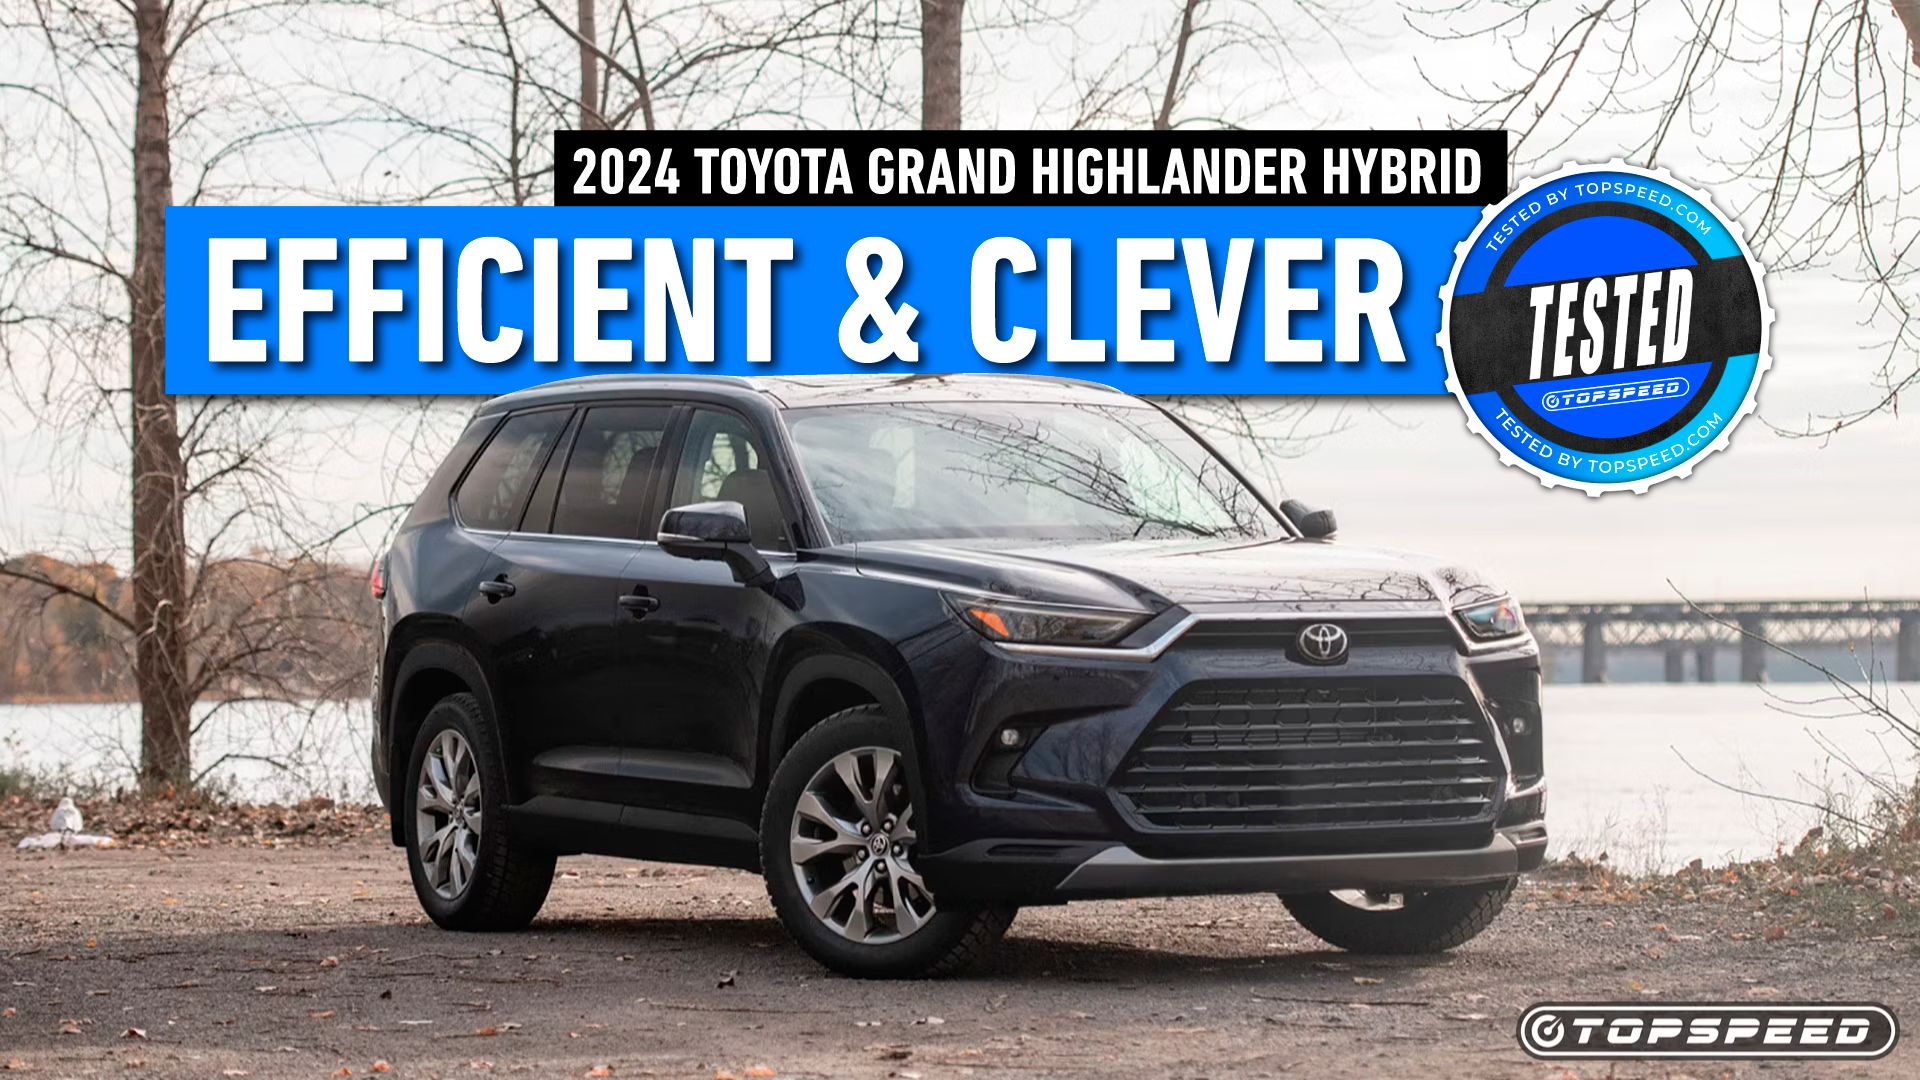 2024 Toyota Grand Highlander Vs. 2024 Lexus TX; What's The Difference?